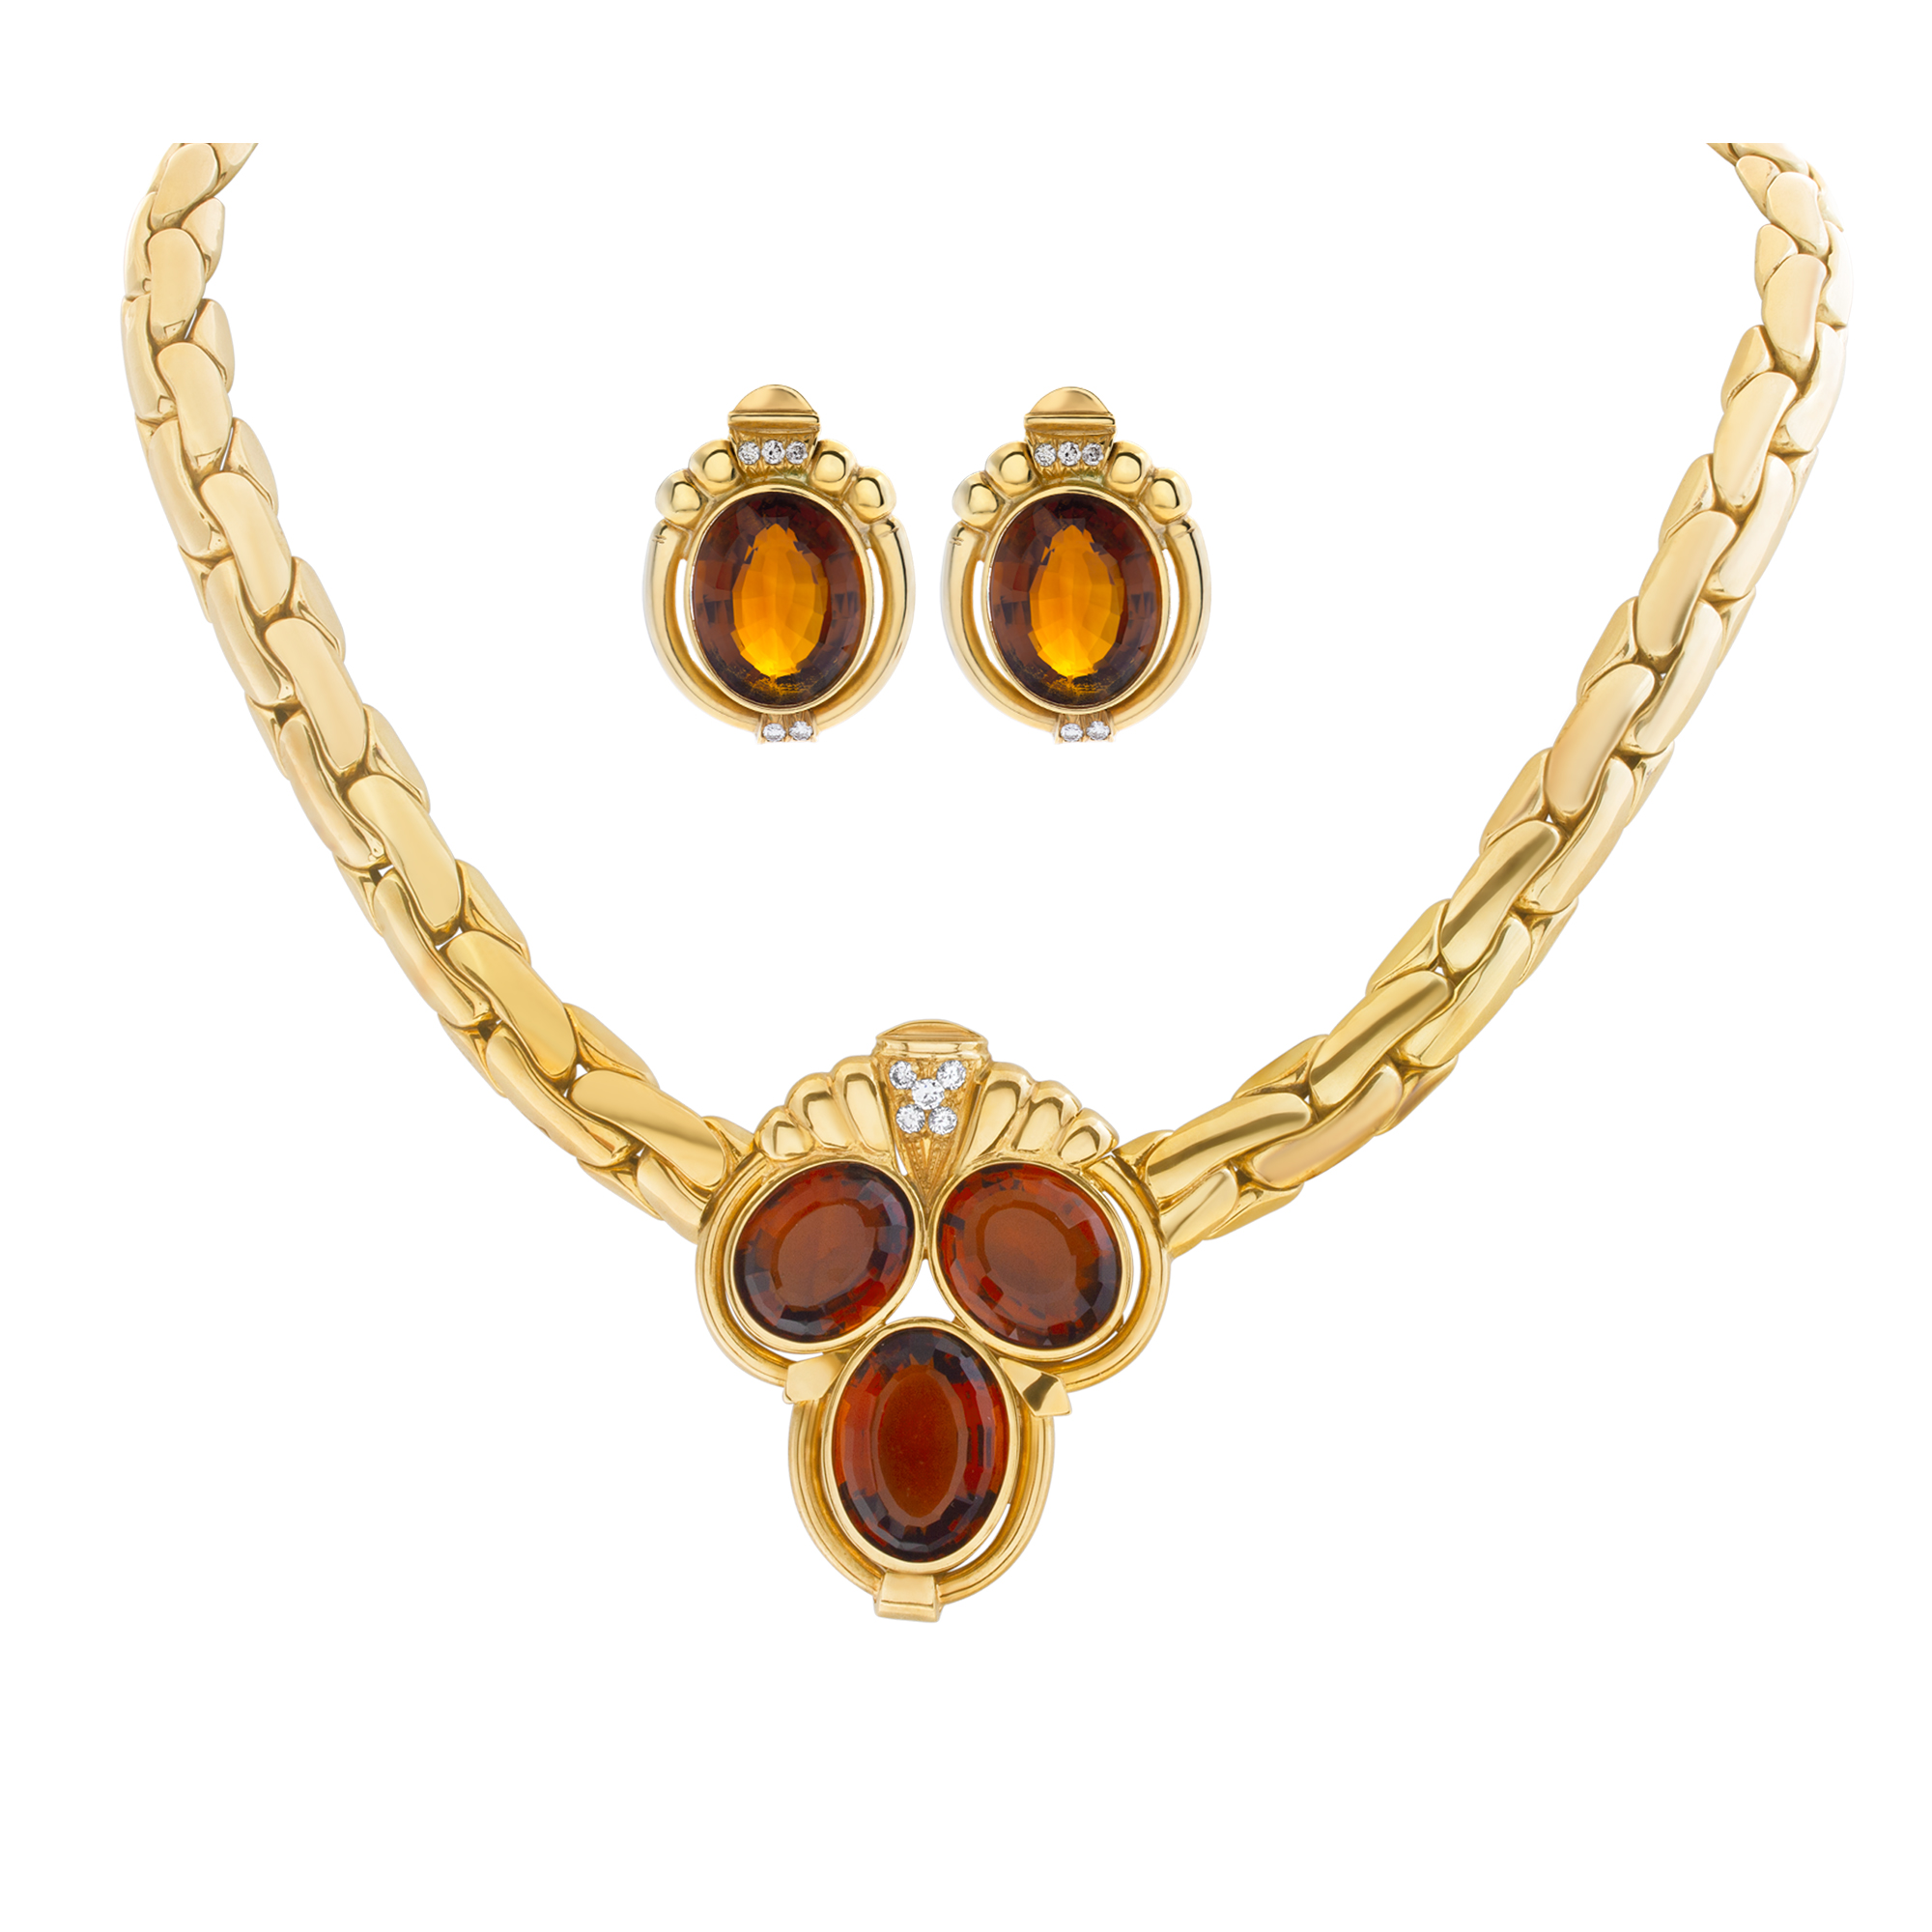 Necklace and Earring set with madeira citrine & diamonds in 18k yellow gold